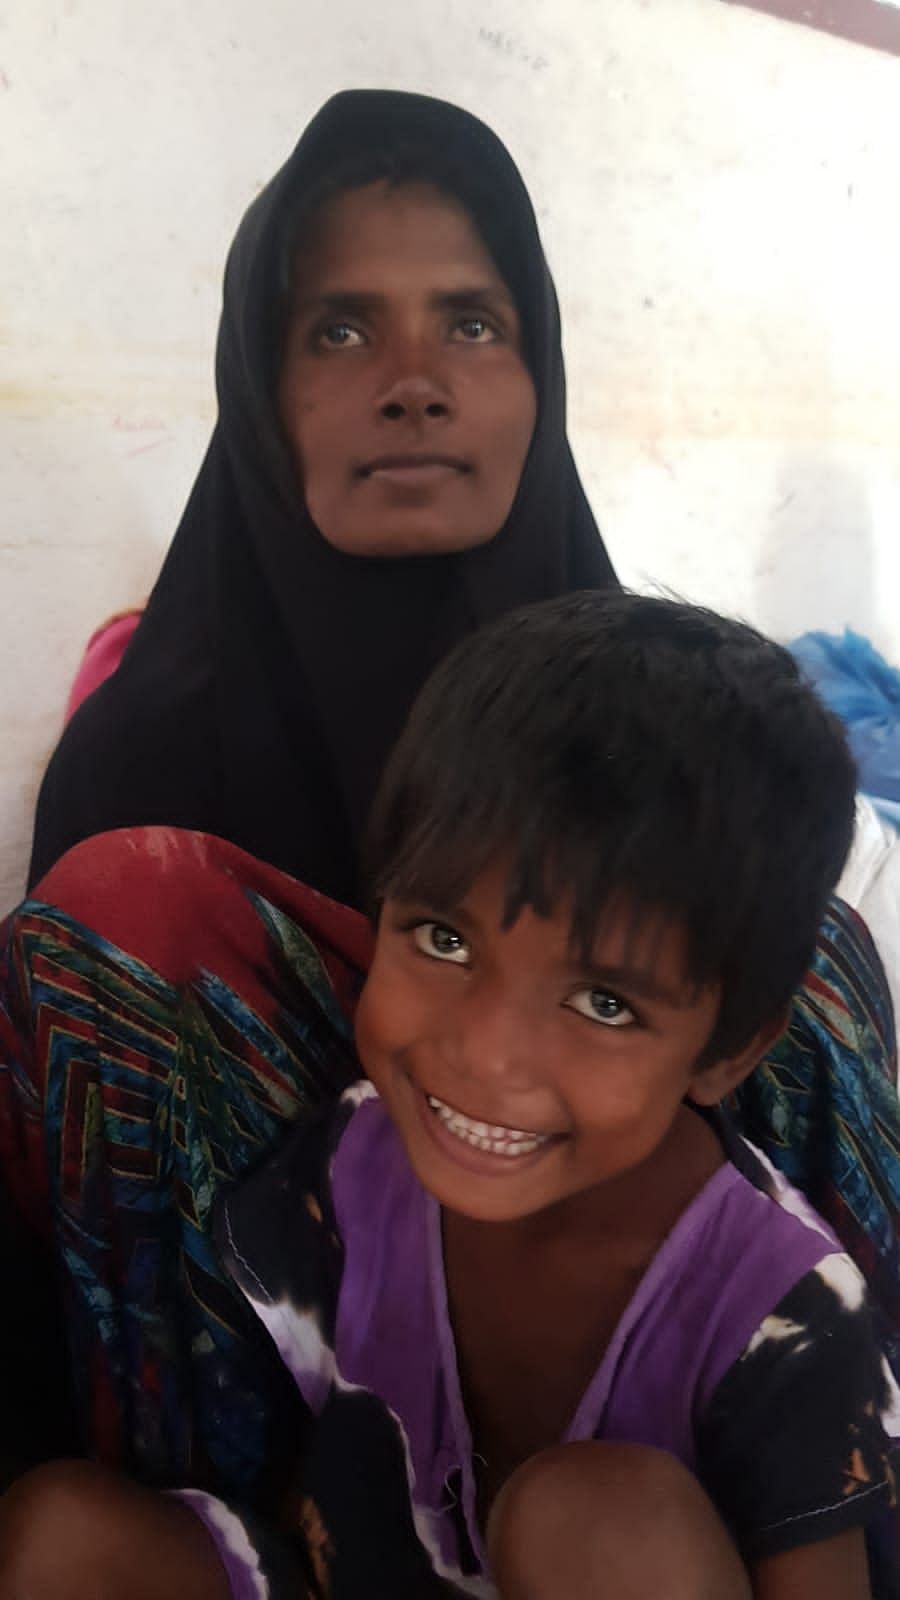 After starving for weeks, around 160 Rohingya refugees were finally rescued by Indonesian civilians on 26 December.